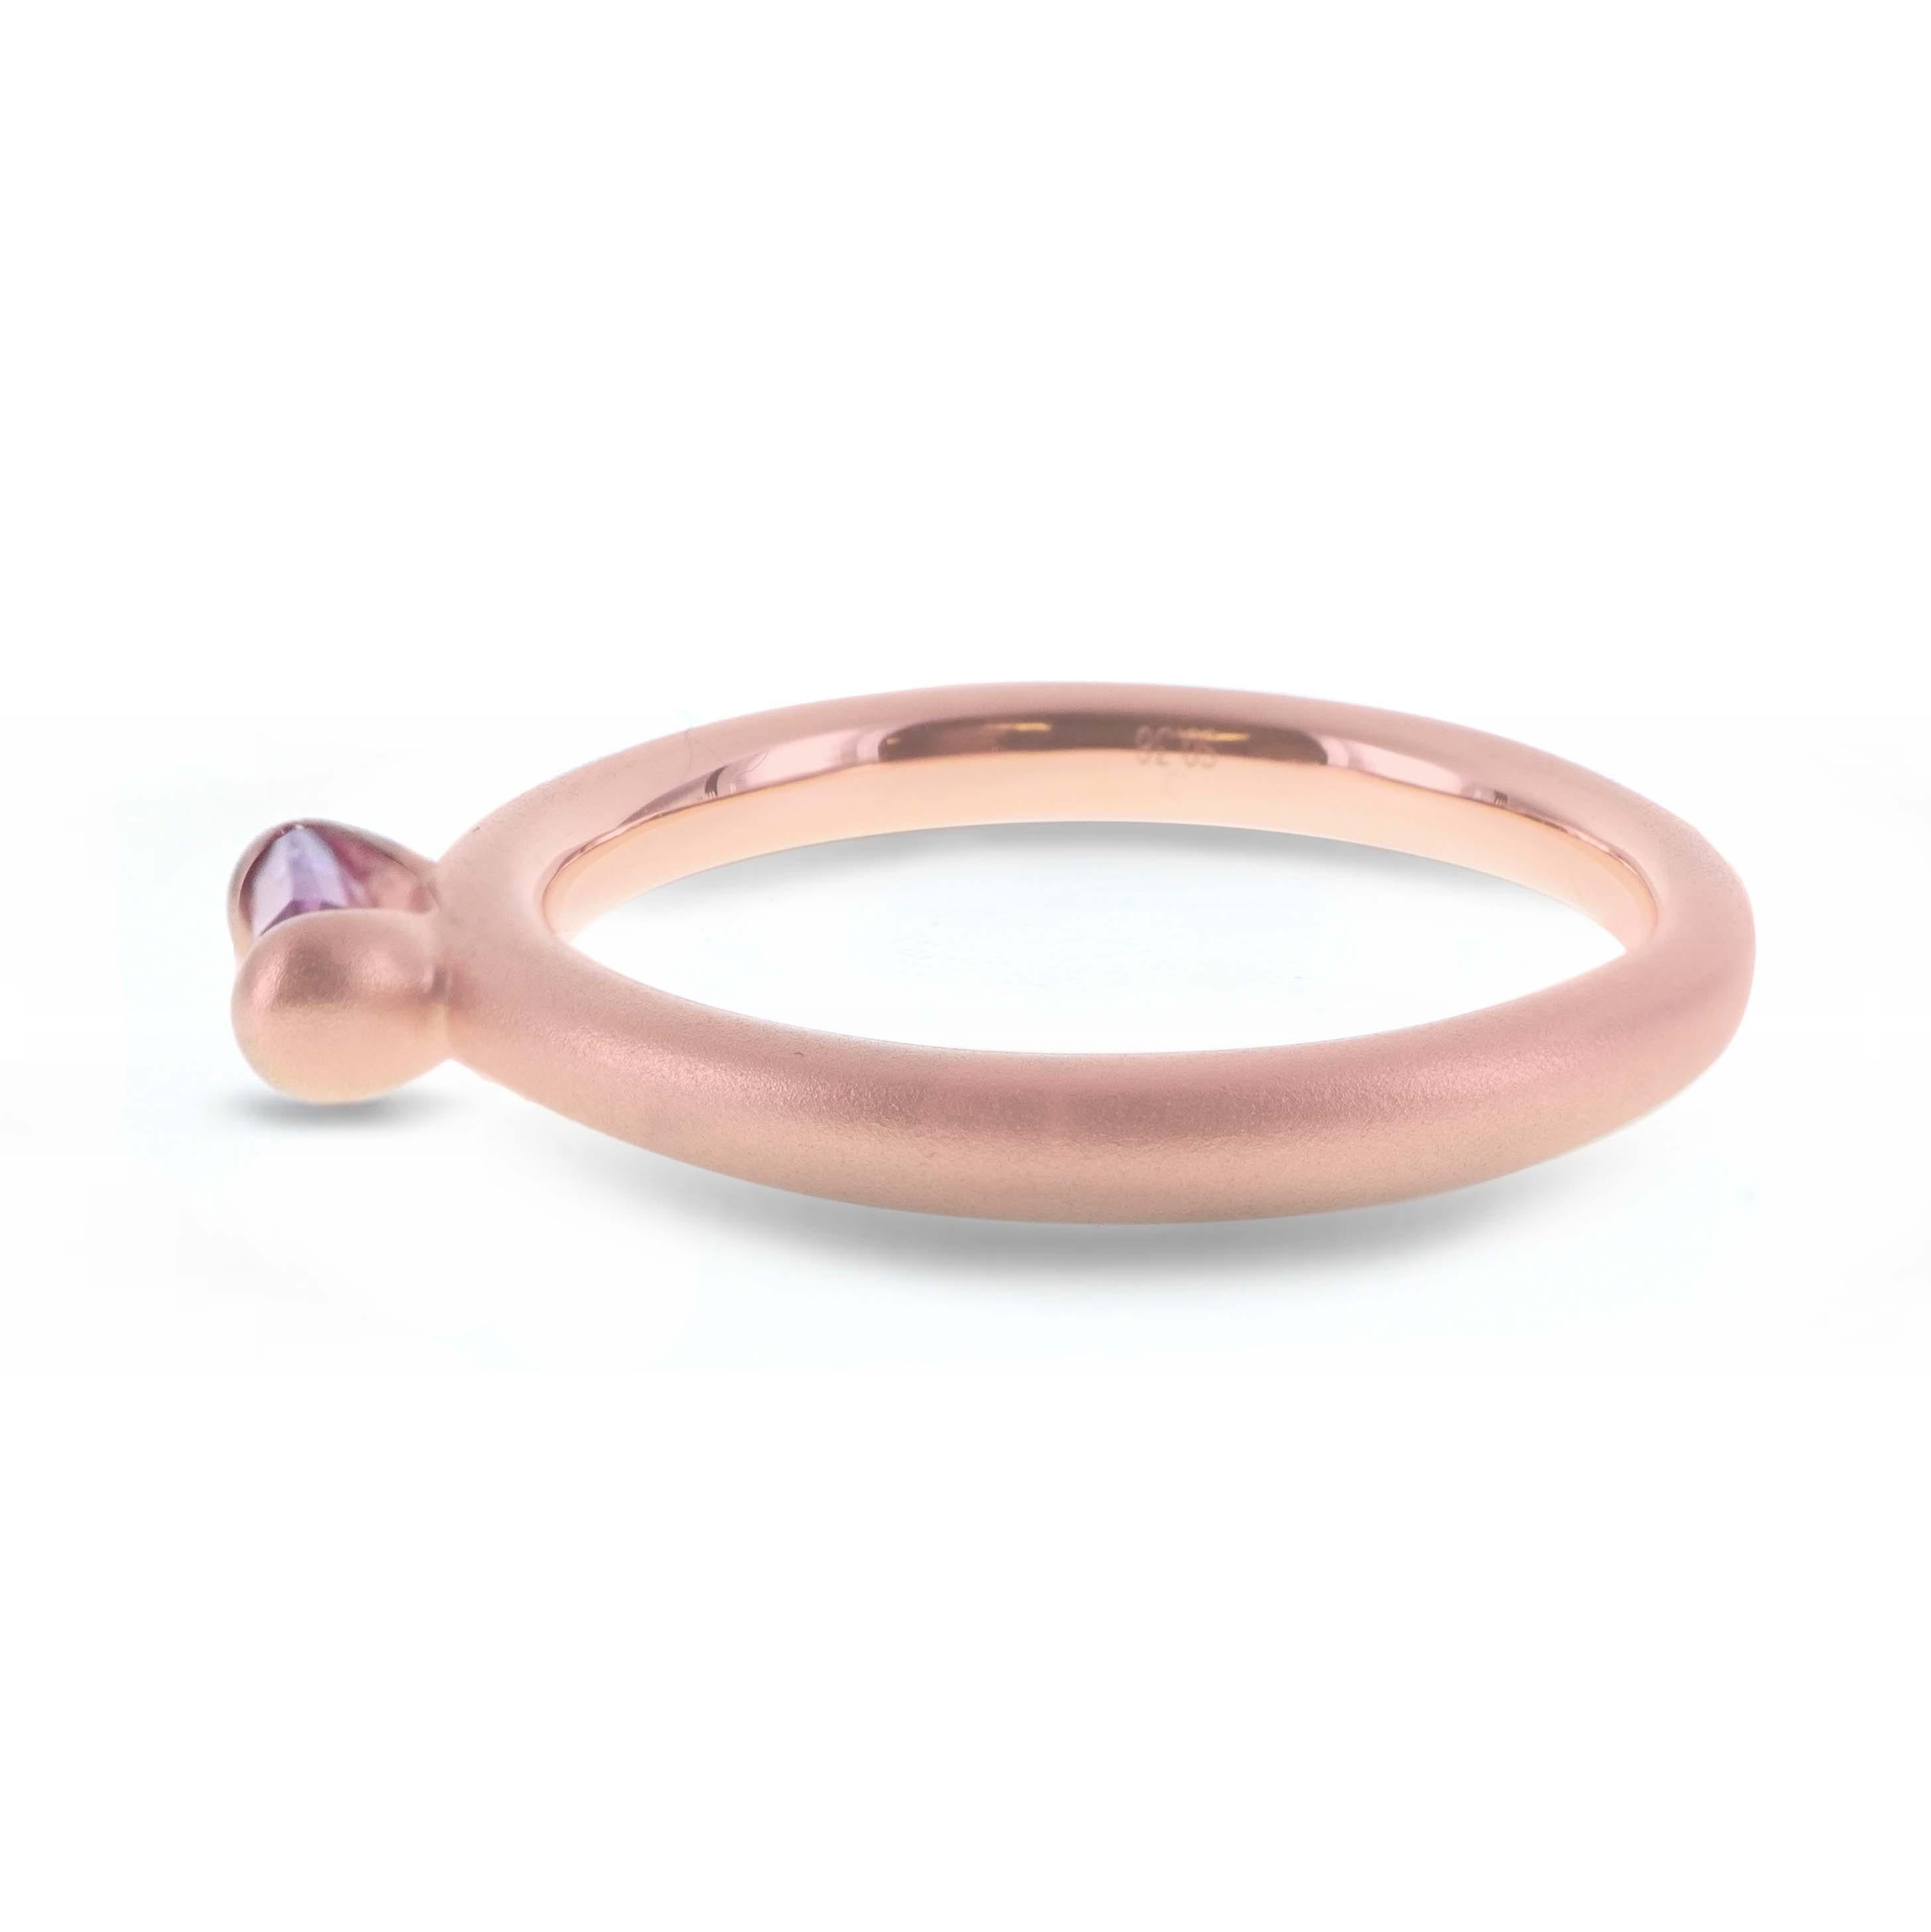 0.36 carat of super saturated hot pink sapphire is set in this 18K matt finish gold ring. The ring is hand made in Hong Kong and the gold weighs 3.89 grams. The ring can be worn as a trio ring or can be worn individually. 